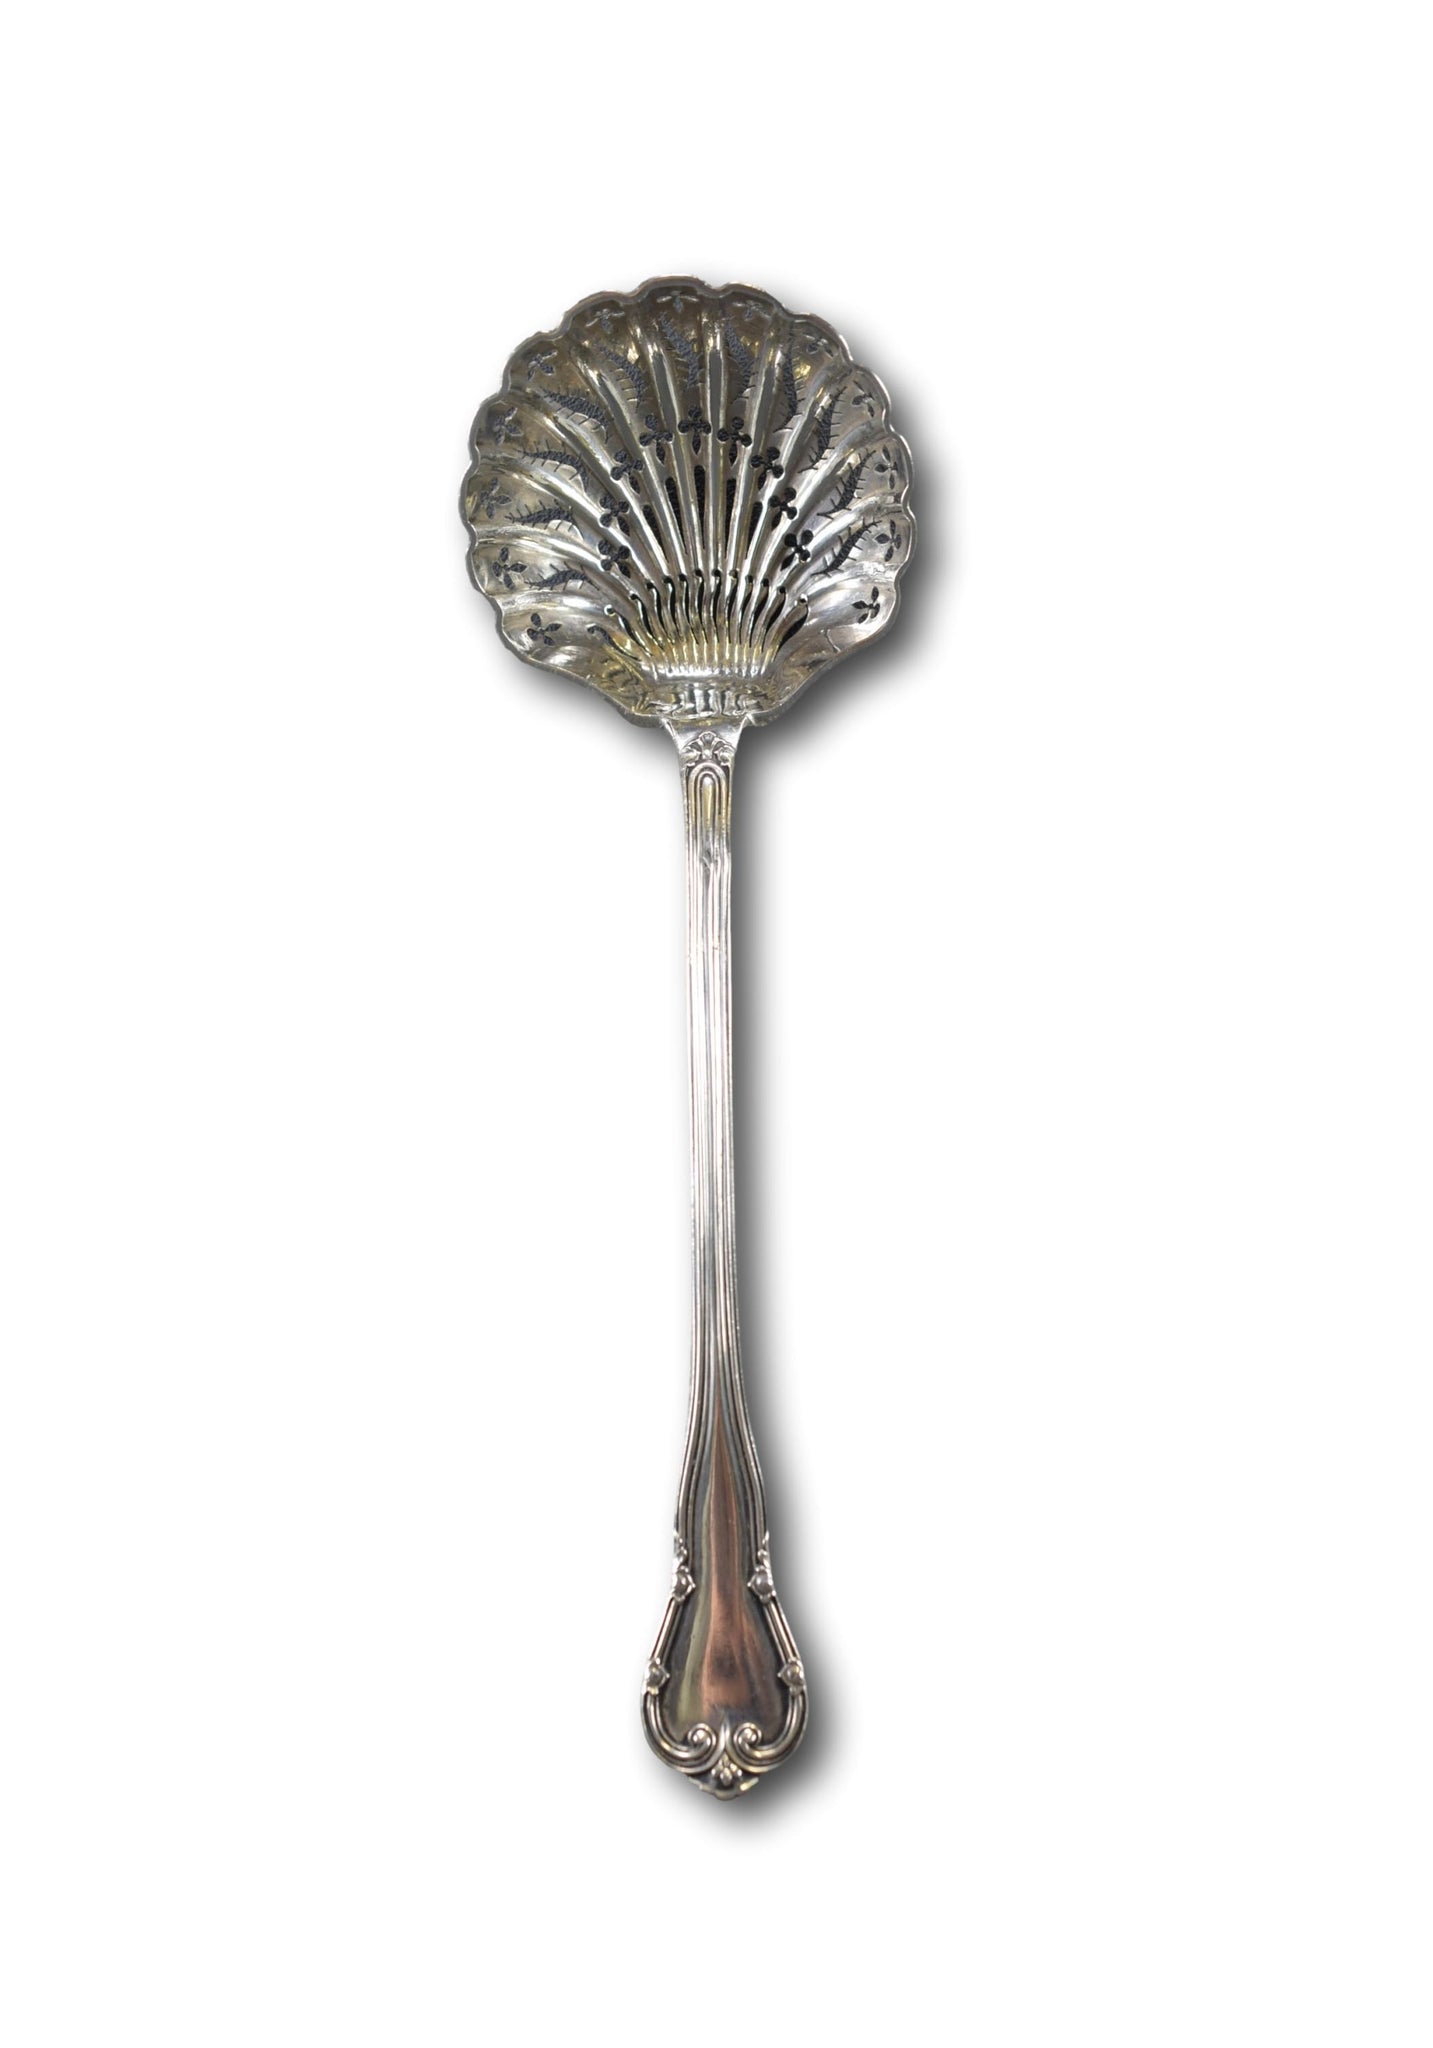 French Antique Sterling Silver Sugar Sifter Spoon